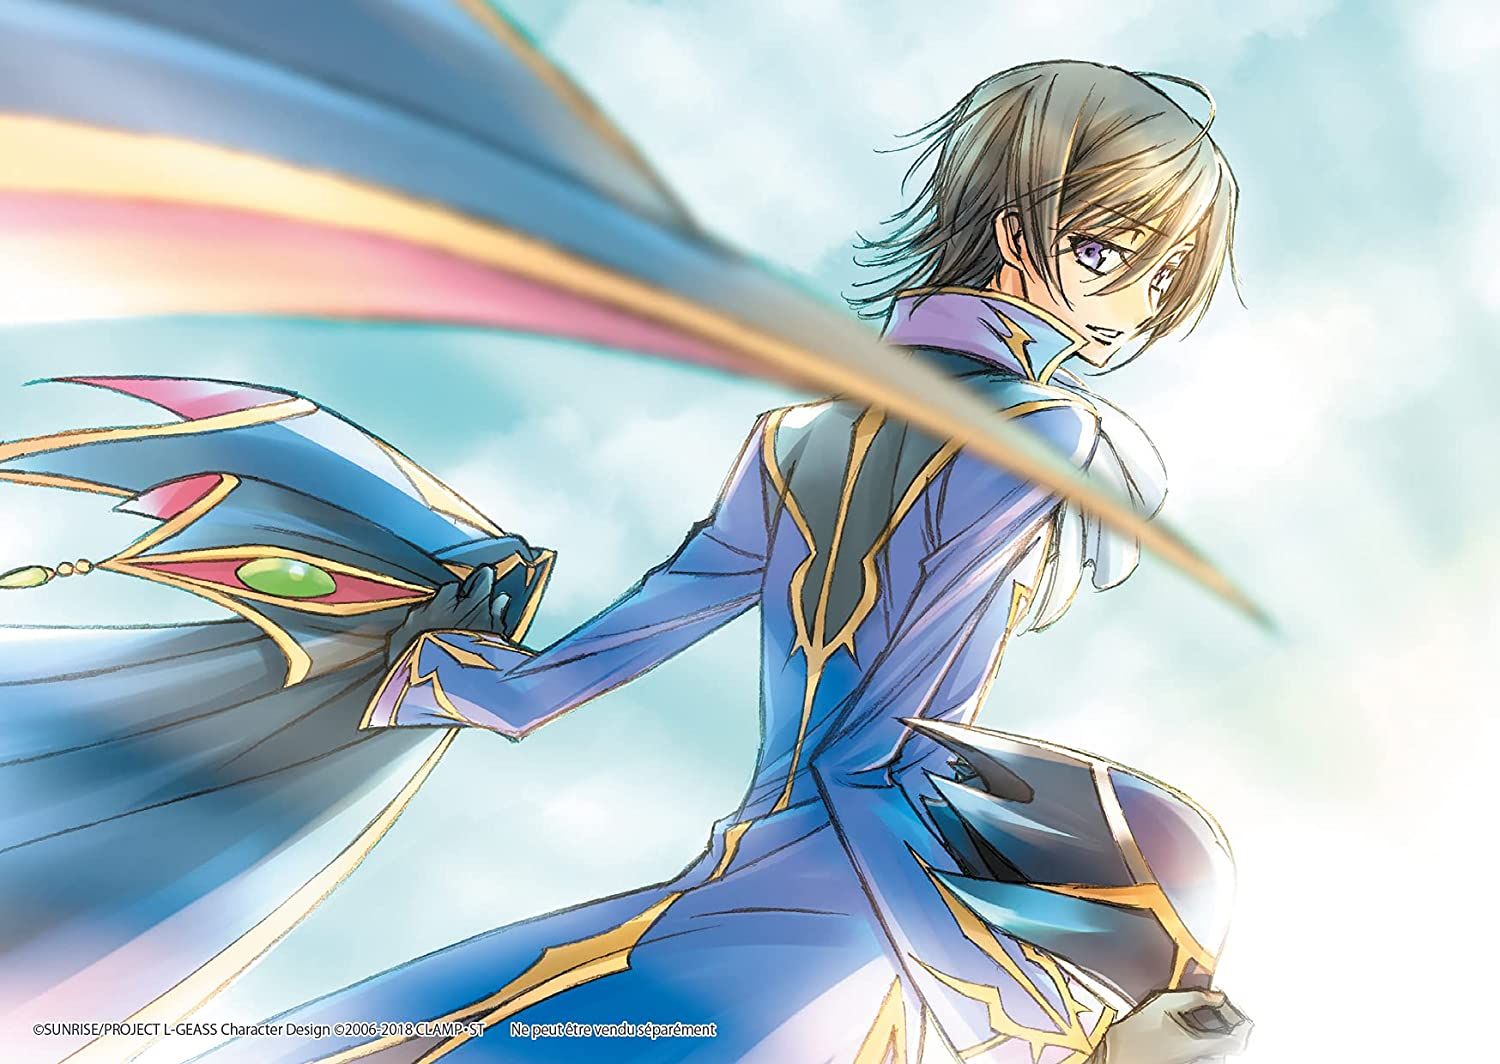 Code Geass: Lelouch of the Rebellion, by Taniguichi, Goro